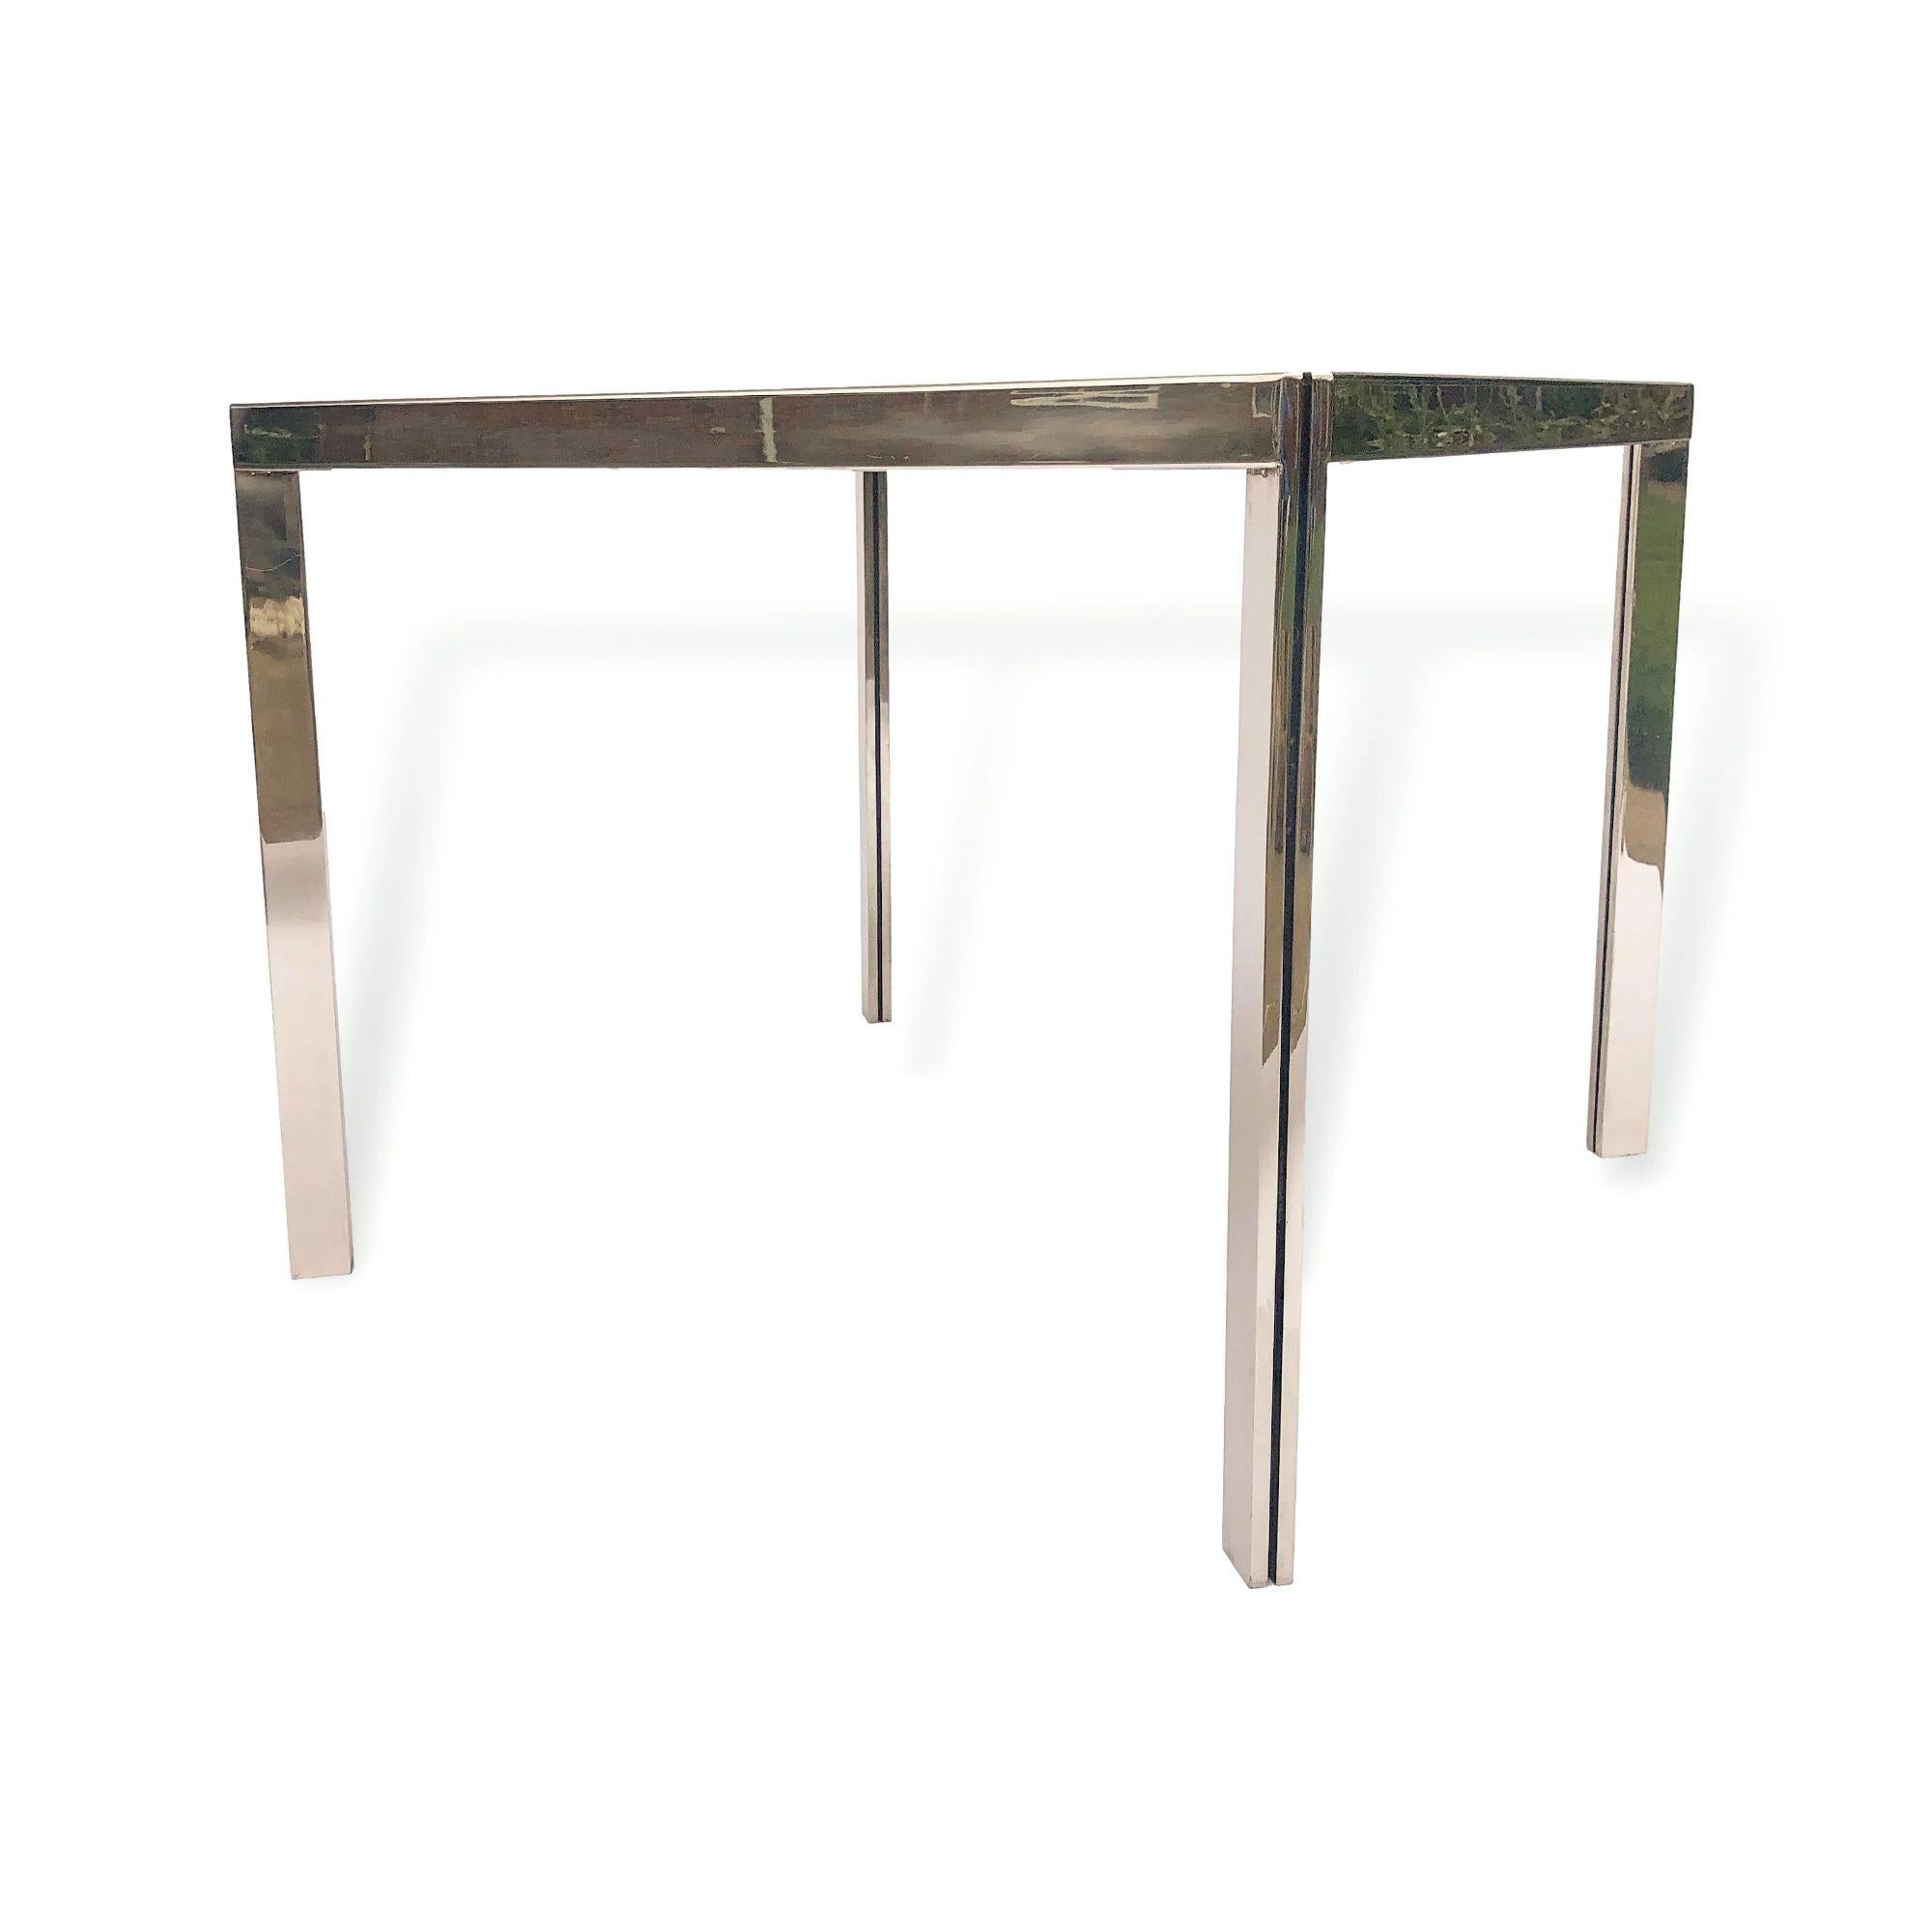 20th Century Vintage Dining Table or Game Table in Travertine Marble and Nickel, 1970s